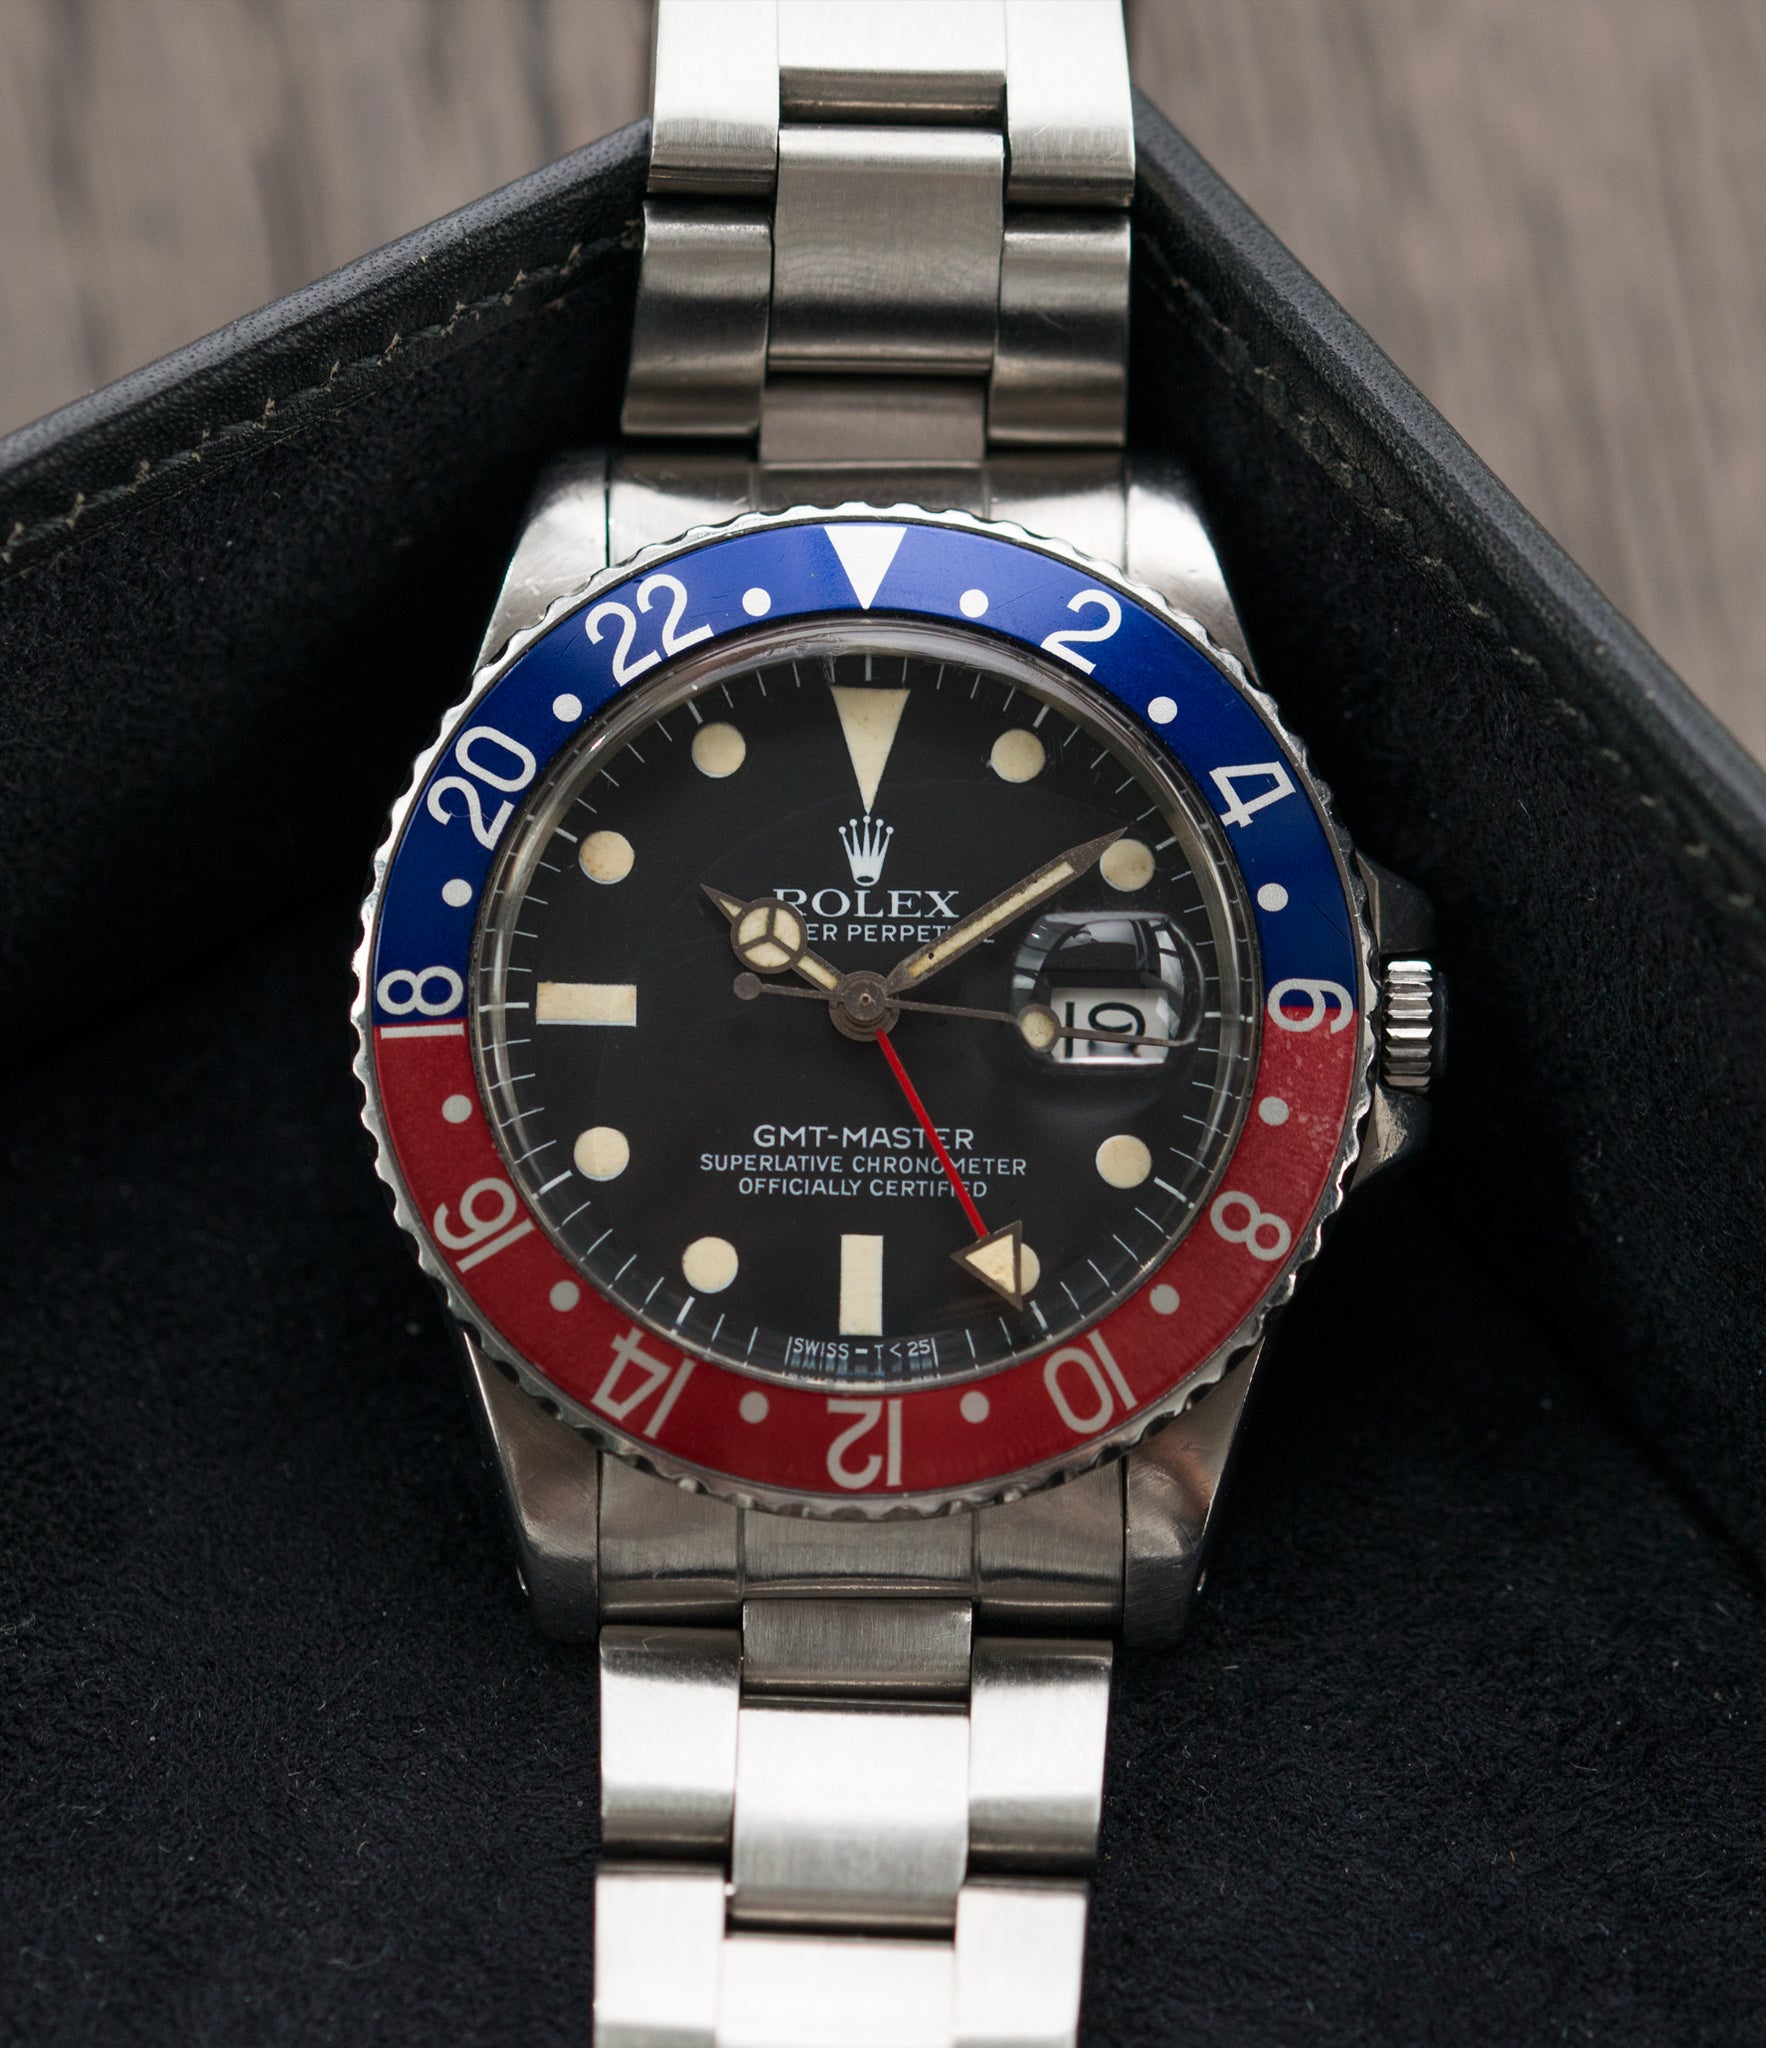 for sale vintage Rolex GMT-Master 16750 steel sport traveller watch for sale online at A Collected Man London vintage watch specialist